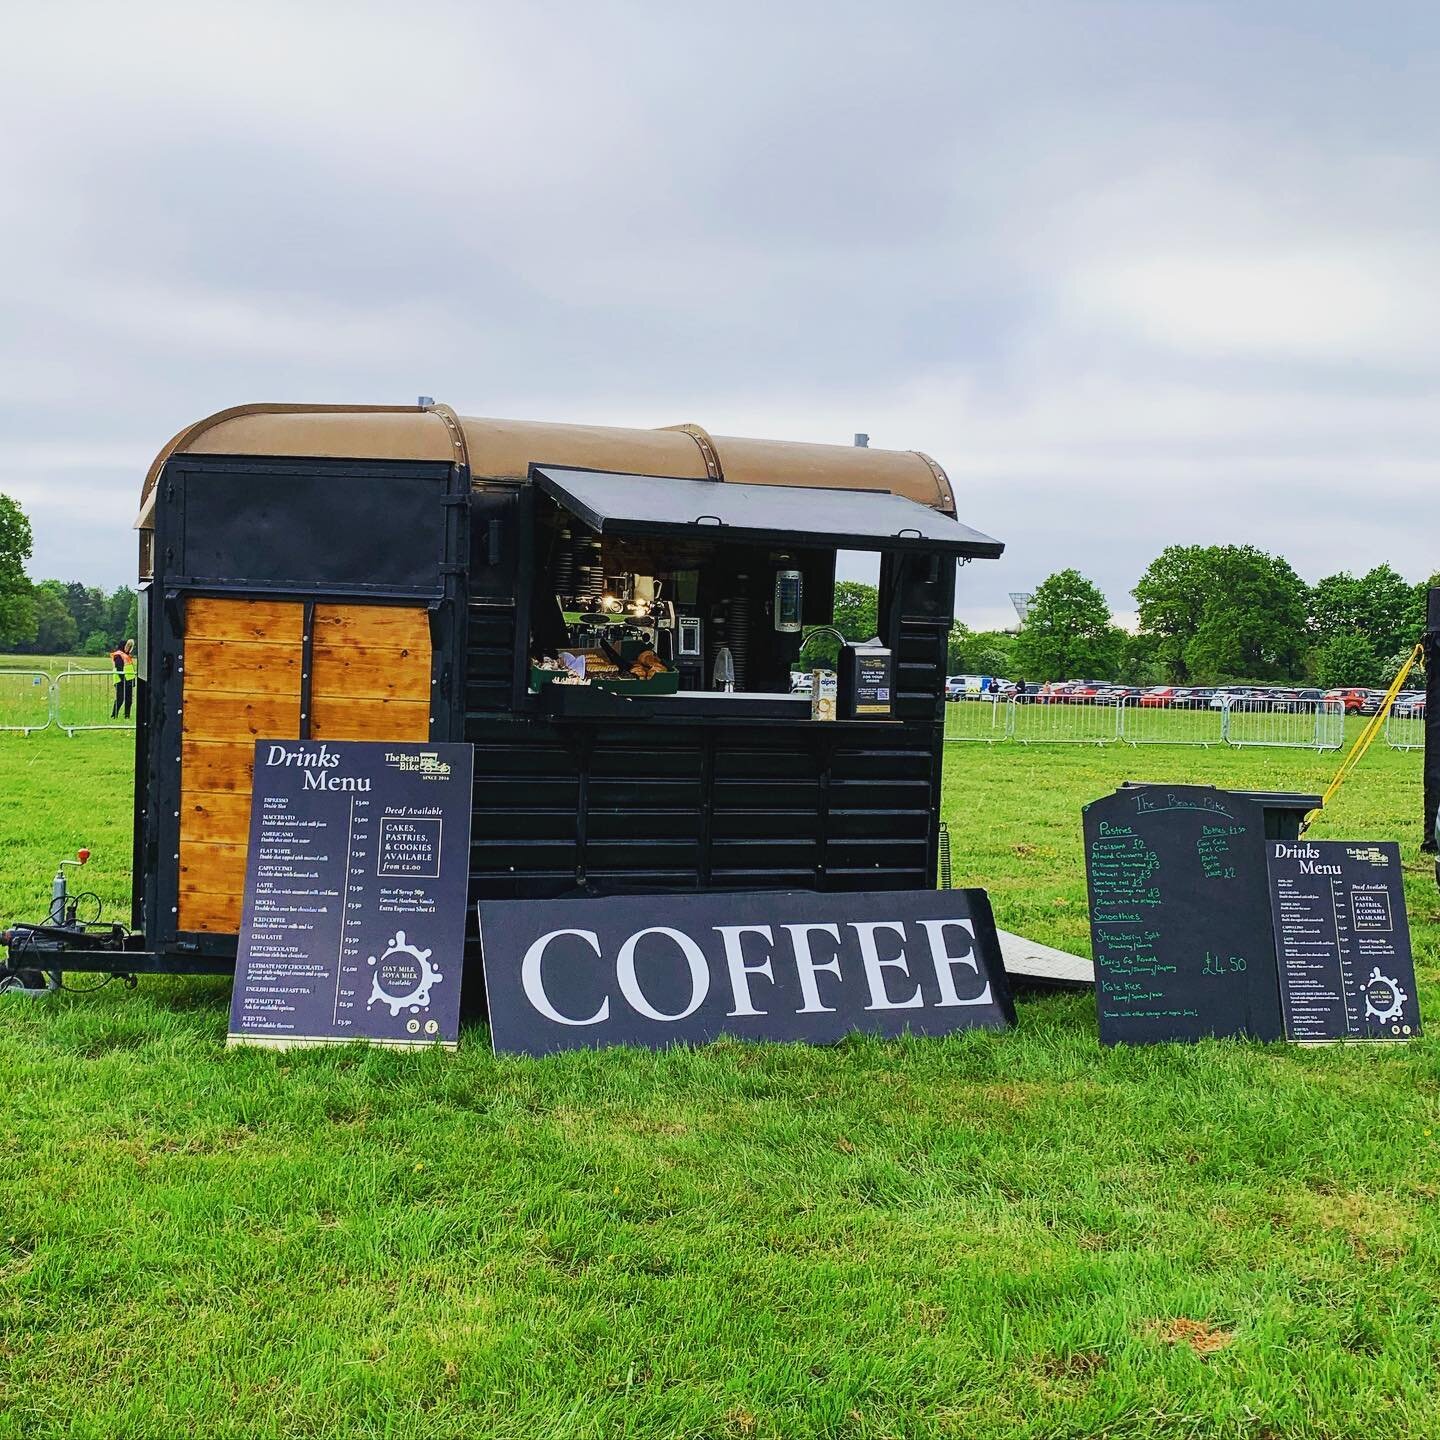 Ready to serve the runners and spectators @rungatwick our barista hot drinks menu, smoothies, pastries and woodfired pizzas! 🍕 ☕️ 🥐